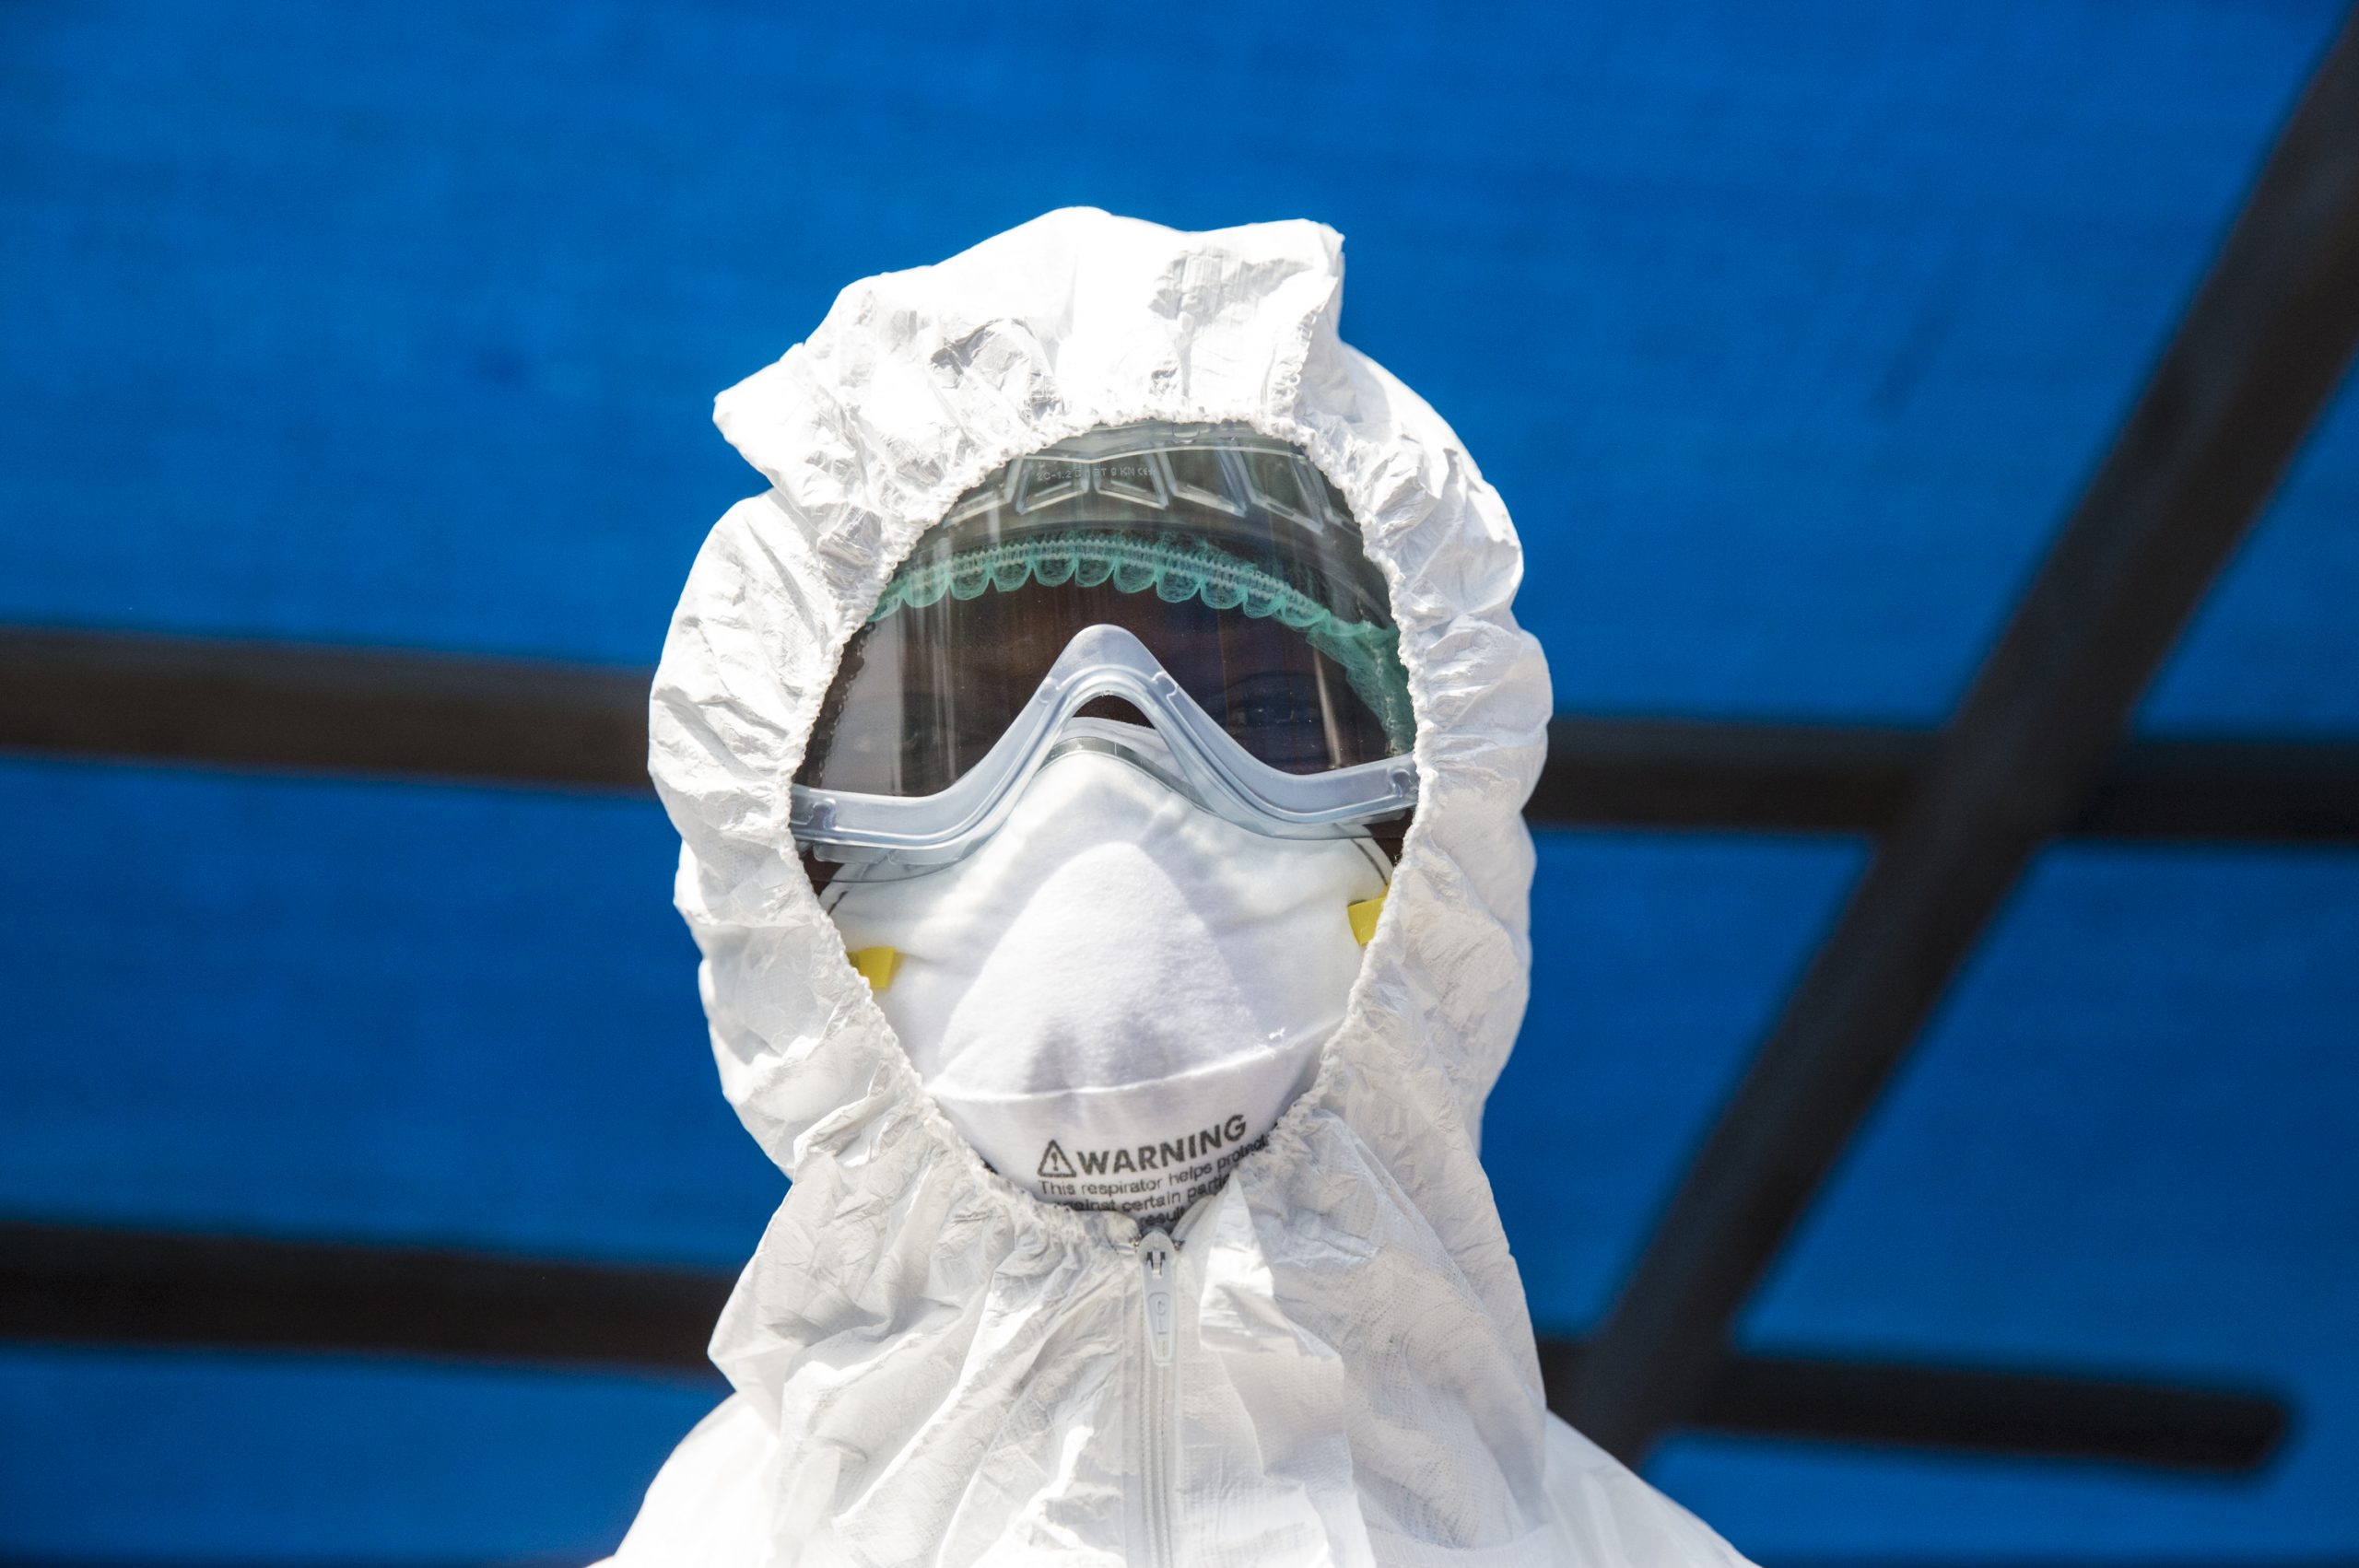 Ebola Outbreak: Do Hazmat Suits Protect Workers, or Just Scare